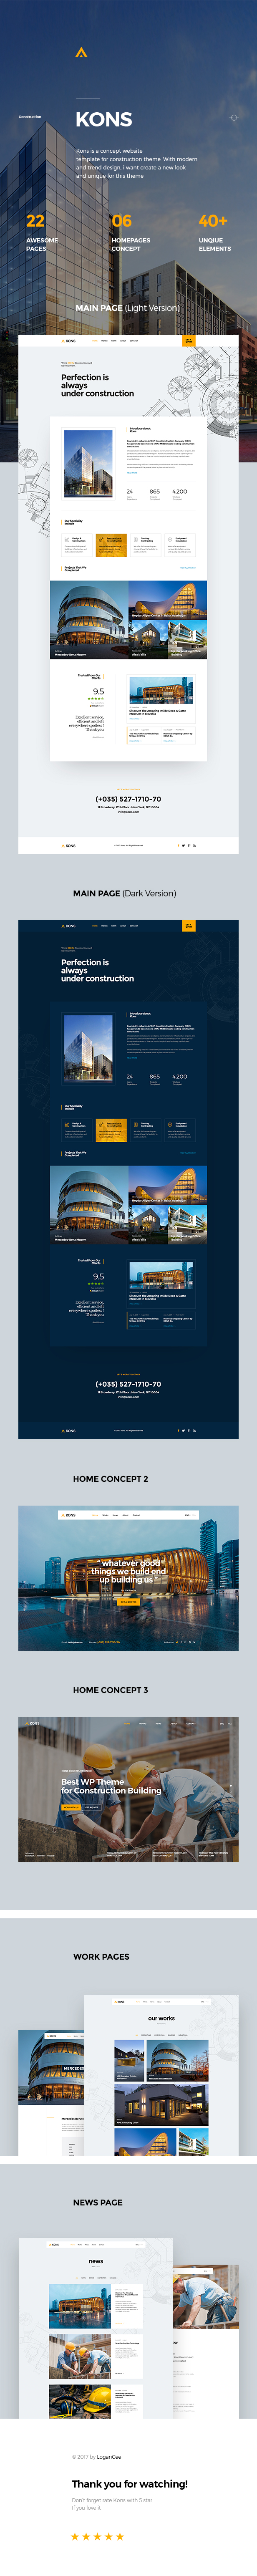 Kons - Construction and Building Template - 5